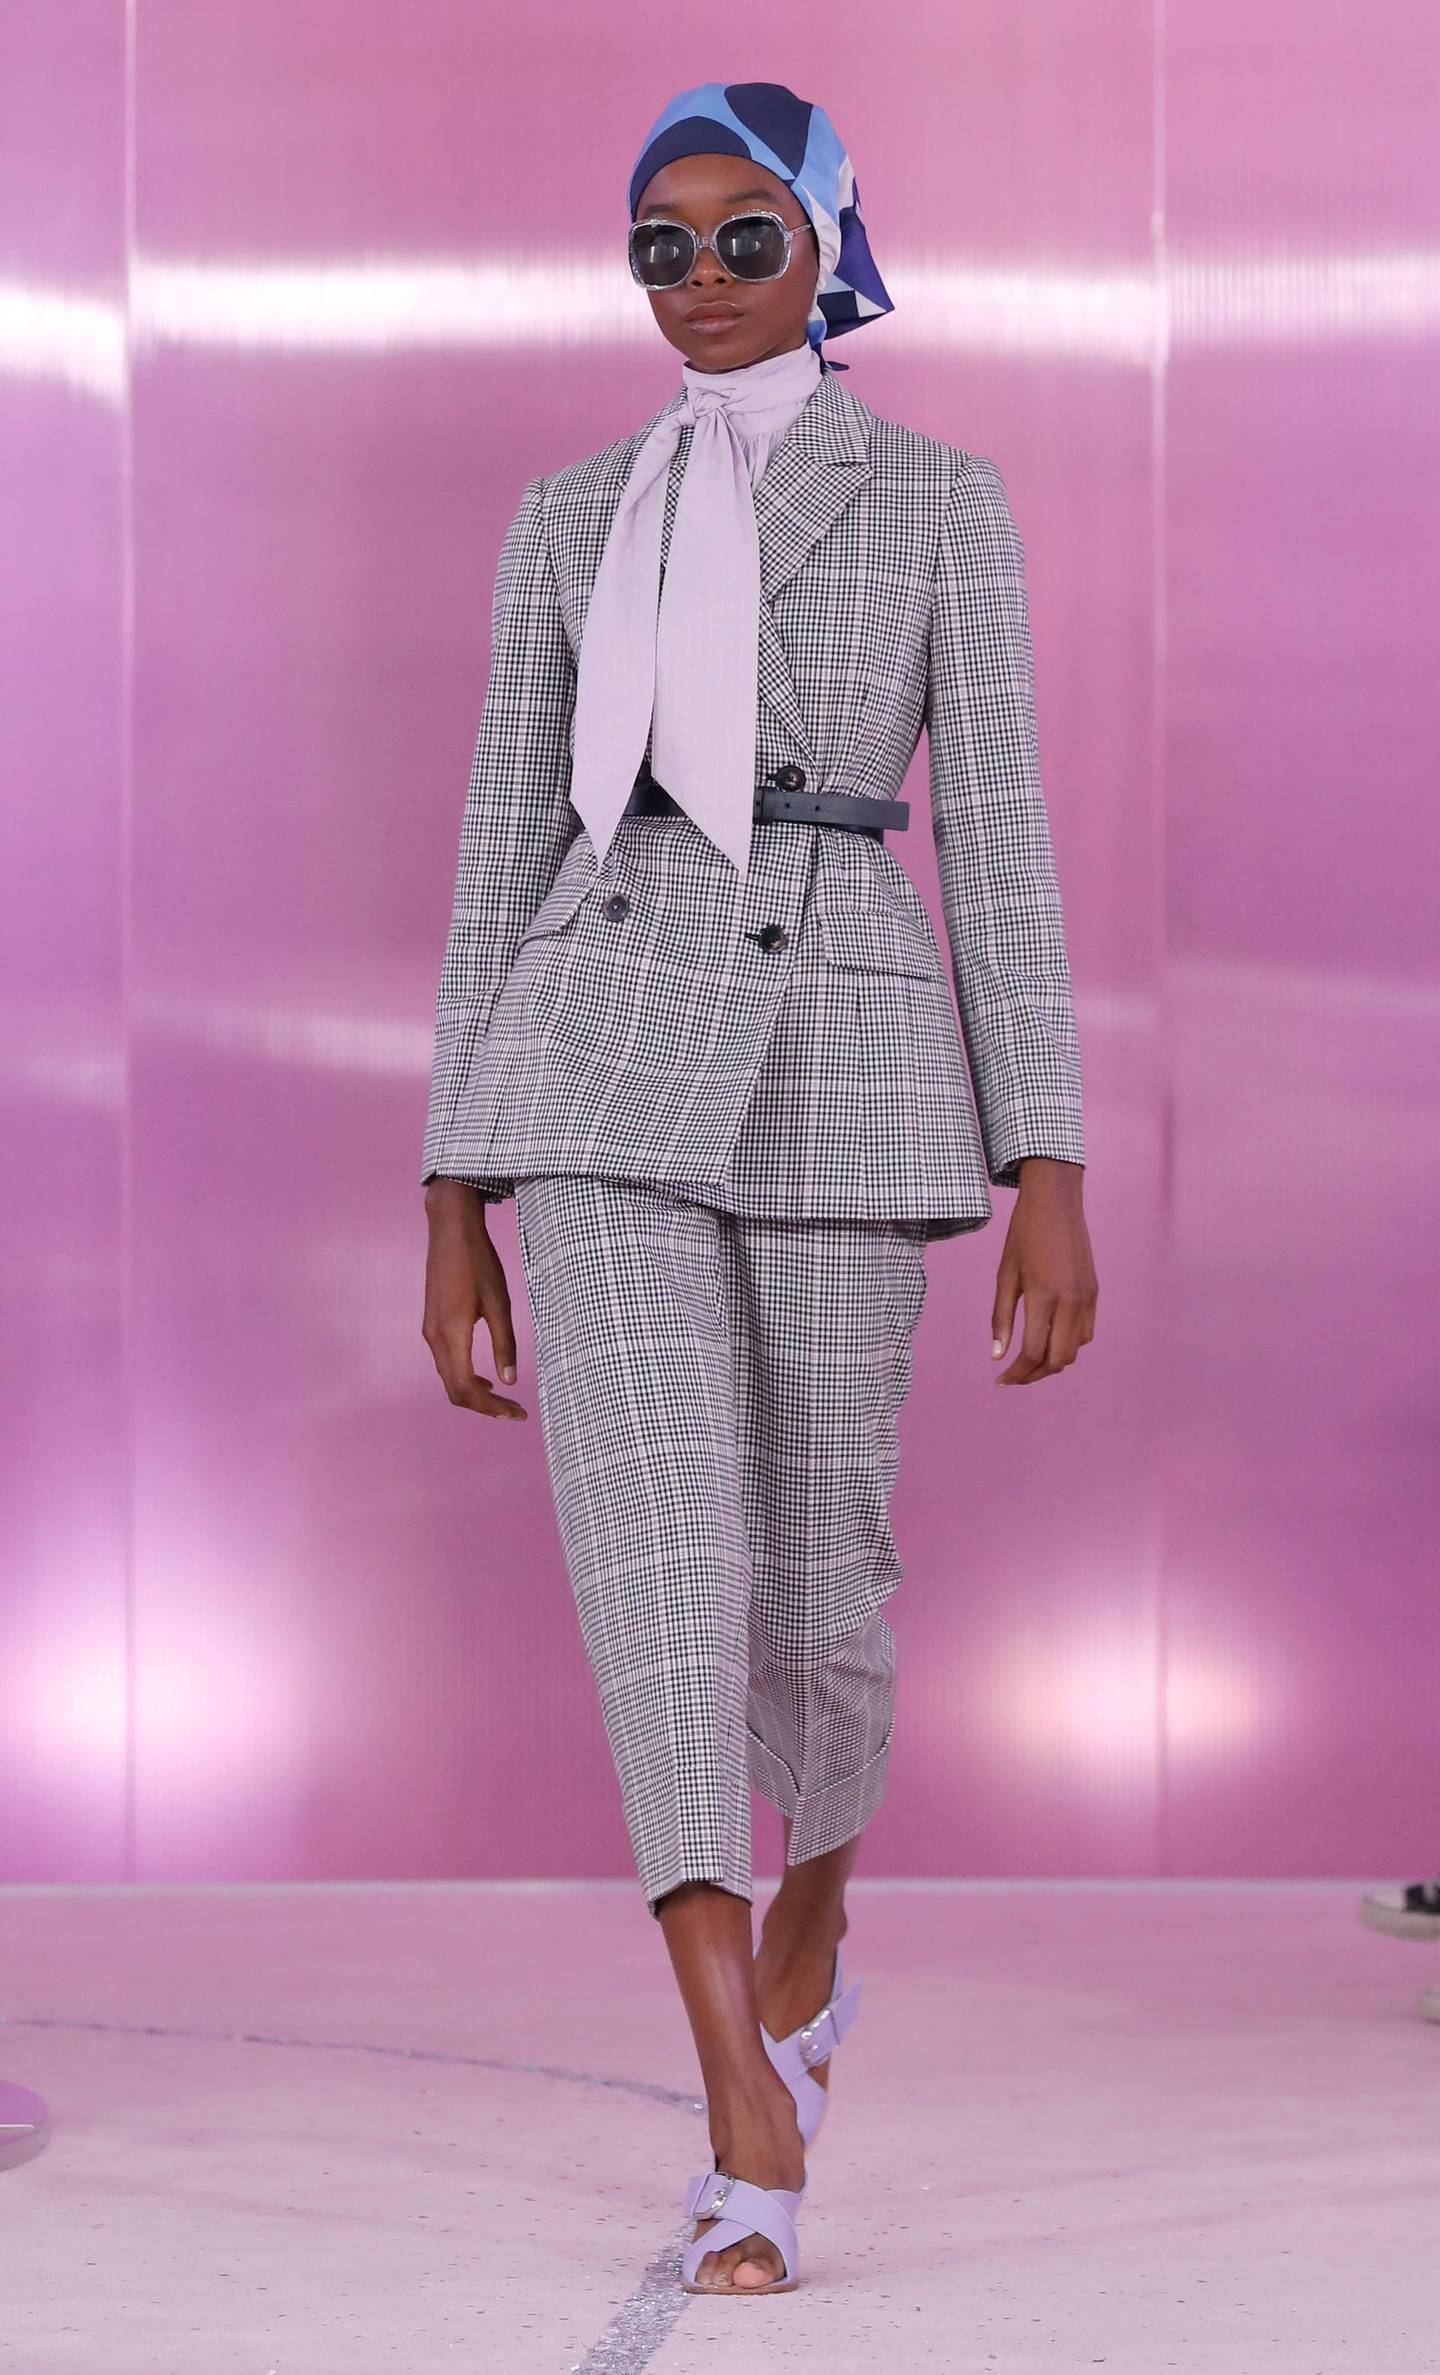 epa07004377 A model presents a creation by Kate Spade at New York Fashion Week Spring 2019 in New York, New York, USA, 07 September 2018. US fashion designer Kate Spade committed suicide in June of this year but the brand still bear's her name.  EPA/PETER FOLEY